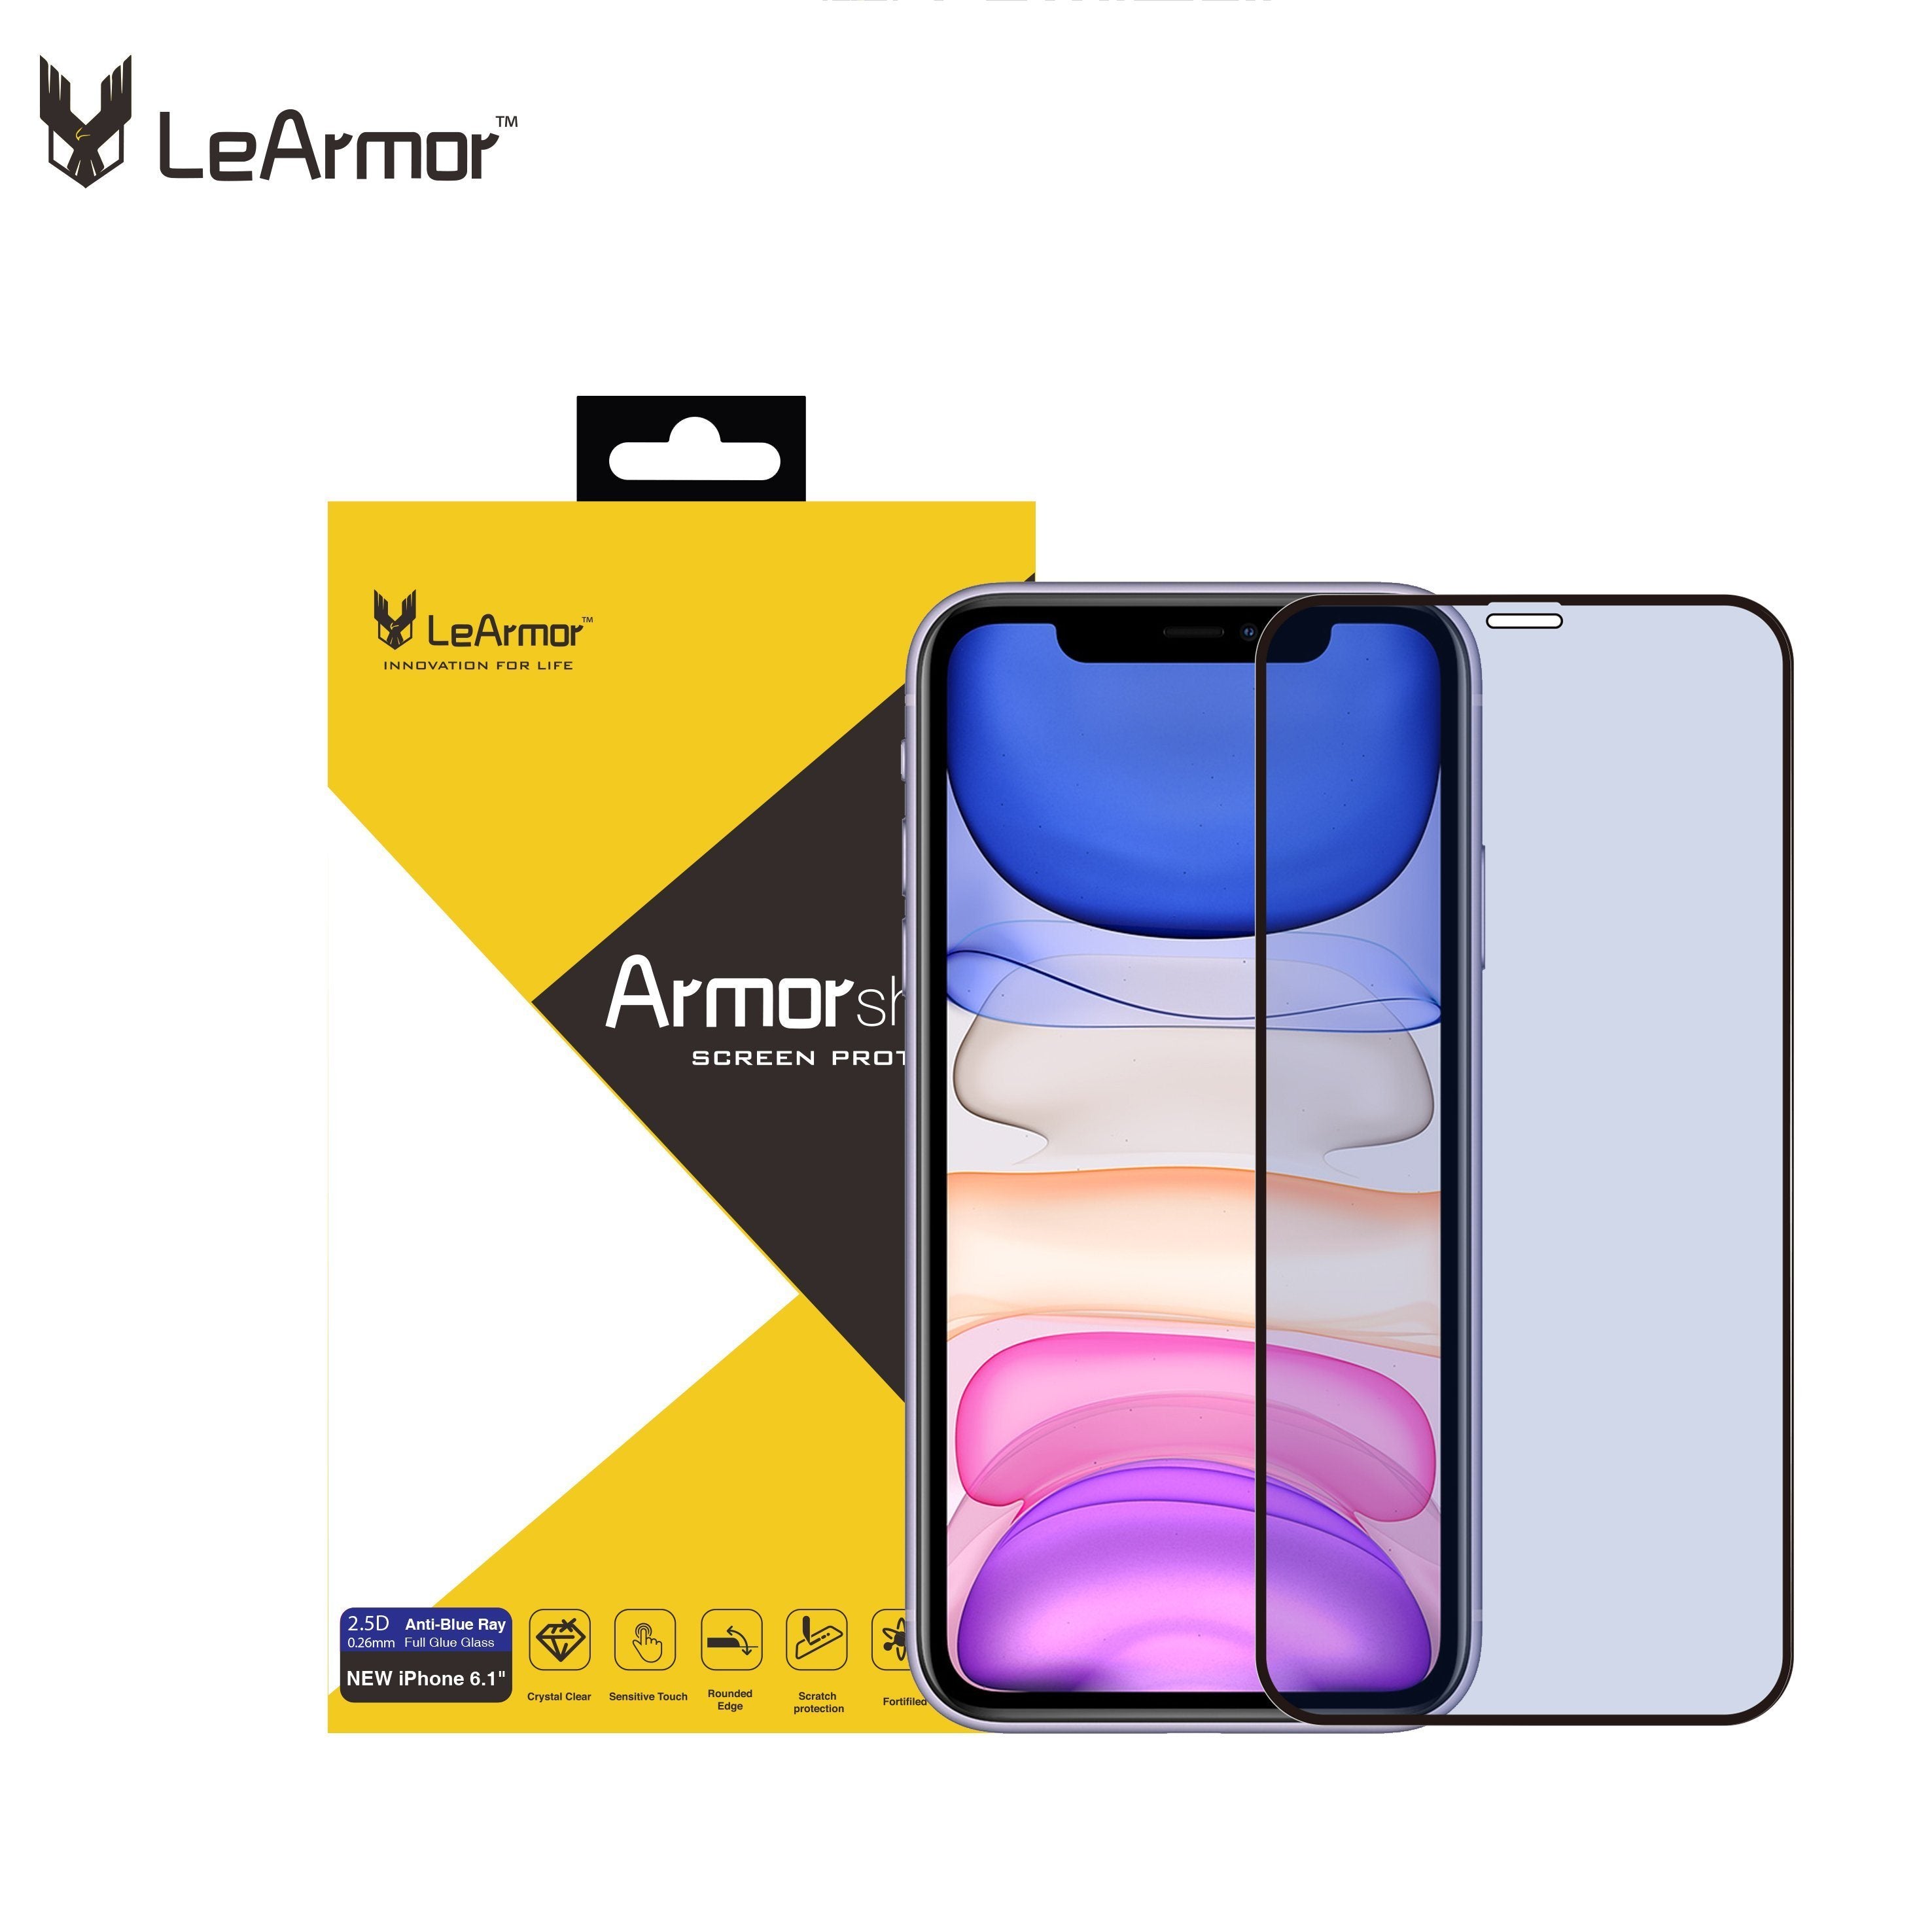 LeArmor 2.5D Anti Blue Ray Tempered Glass Screen Protector for iPhone 11 6.1"(2019) Tempered Glass LeArmor 